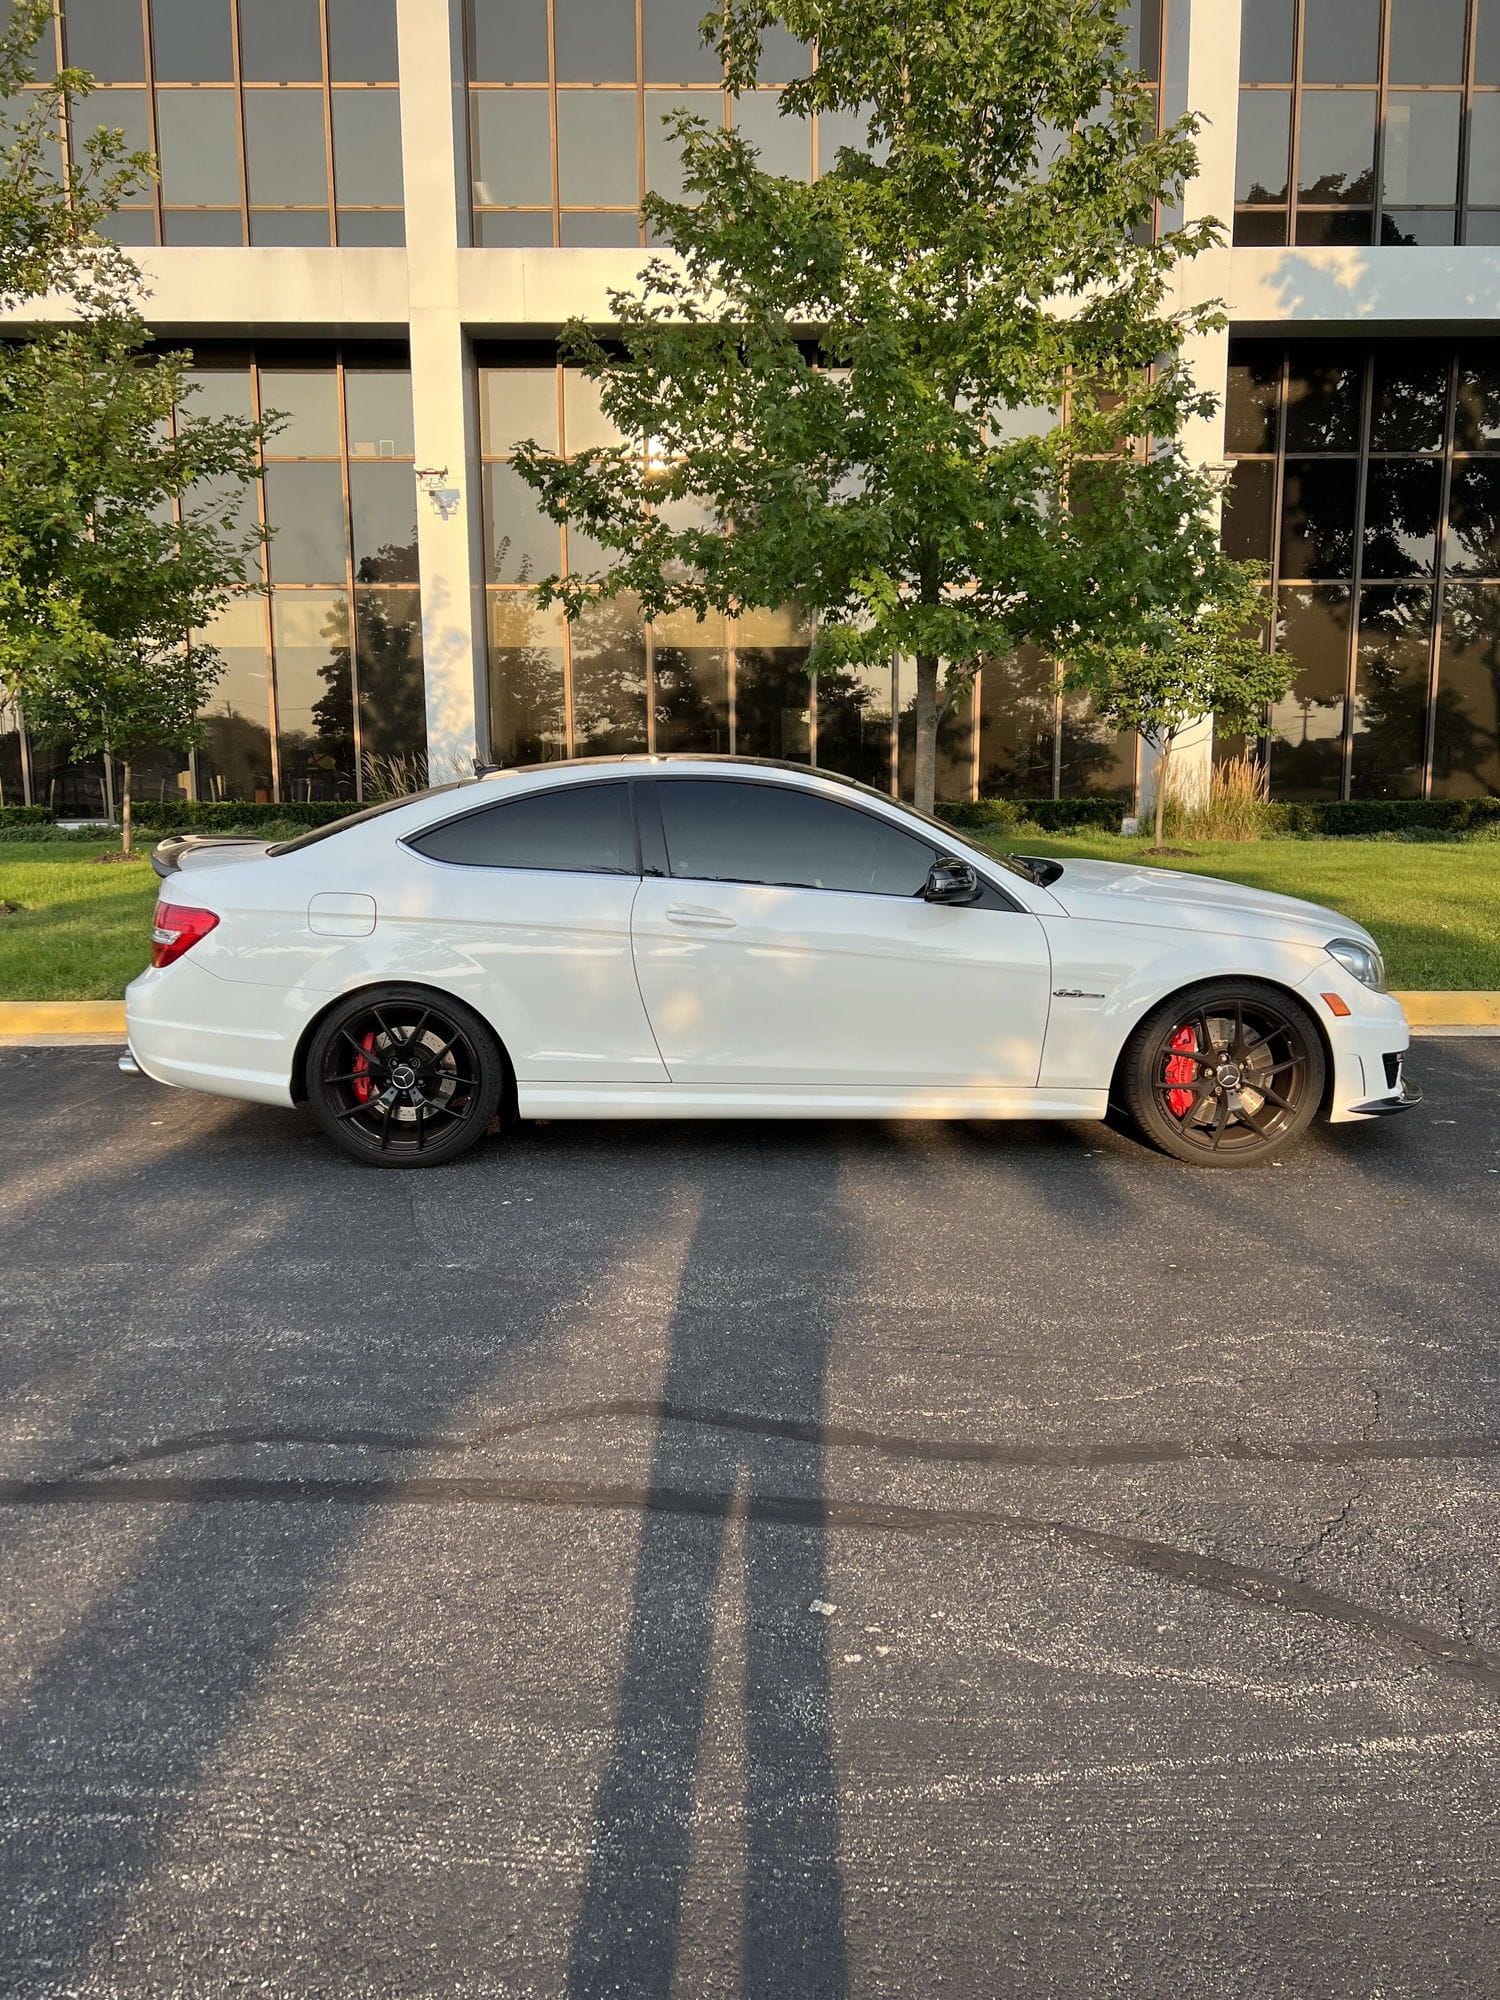 2014 Mercedes-Benz C63 AMG - FIRE-BREATHING C63 507 FOR SALE - Used - Chicago, IL 60604, United States